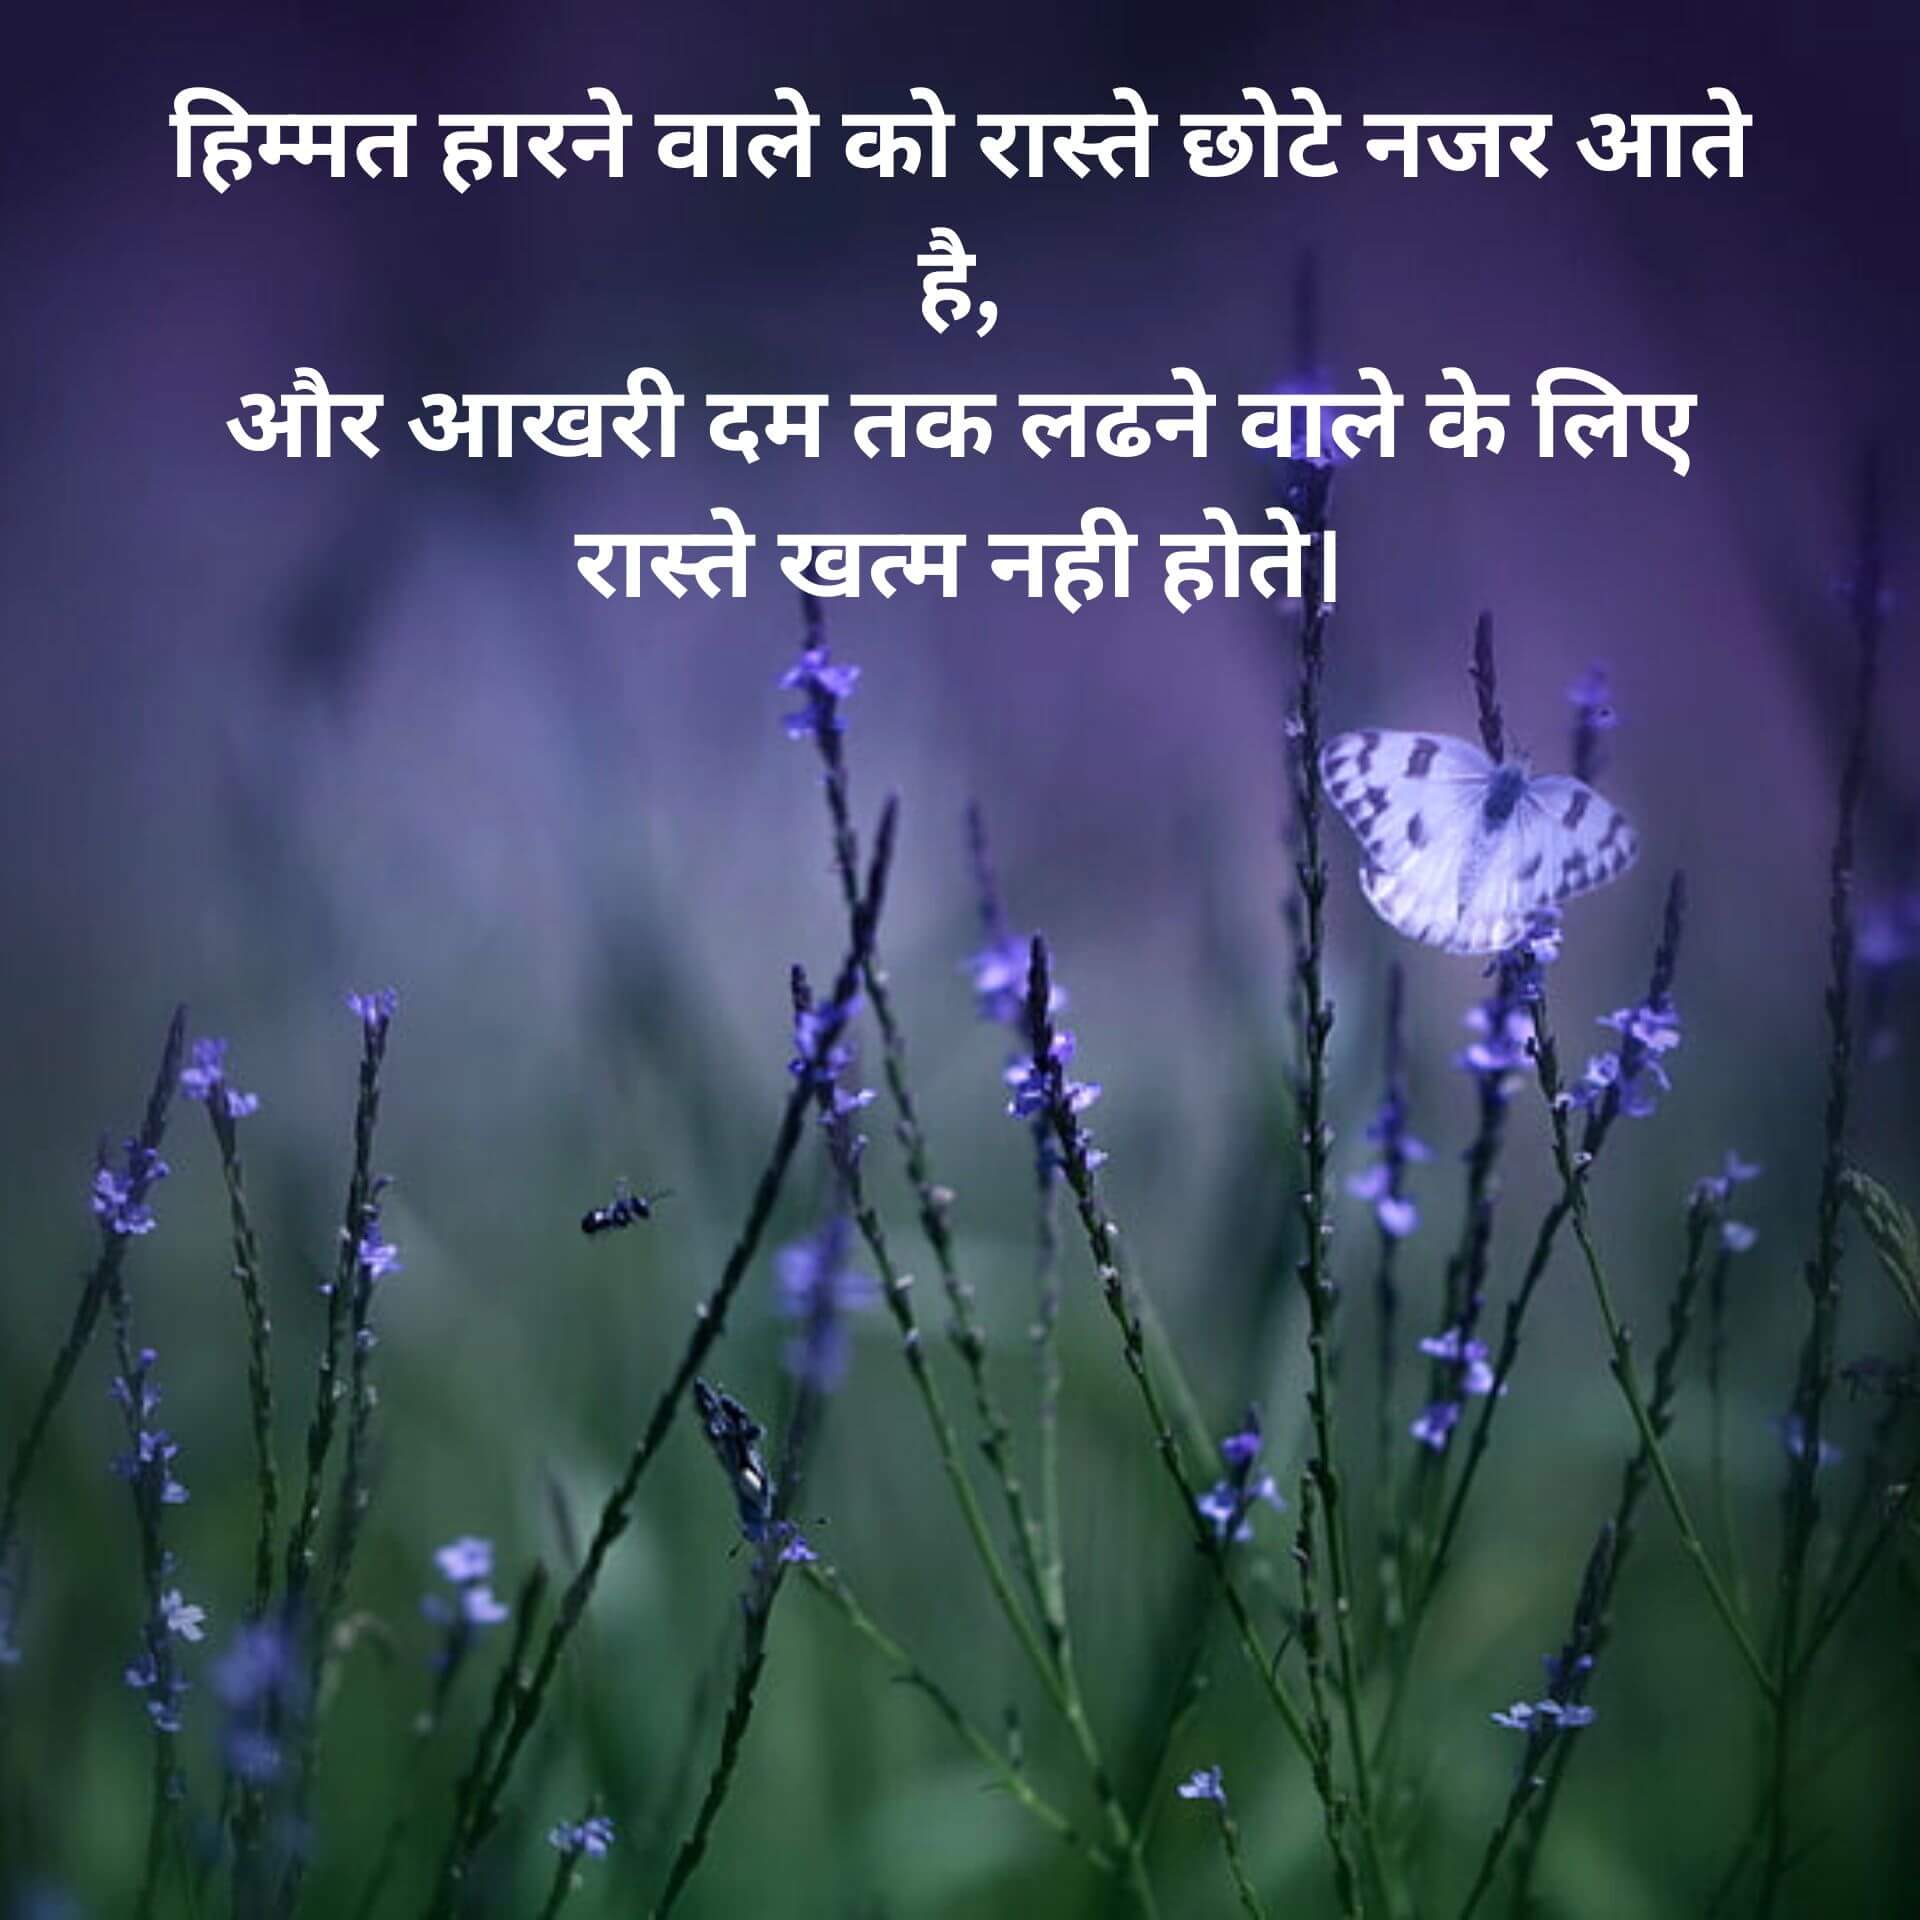 Hindi Motivational Quotes photo Download for Facebook